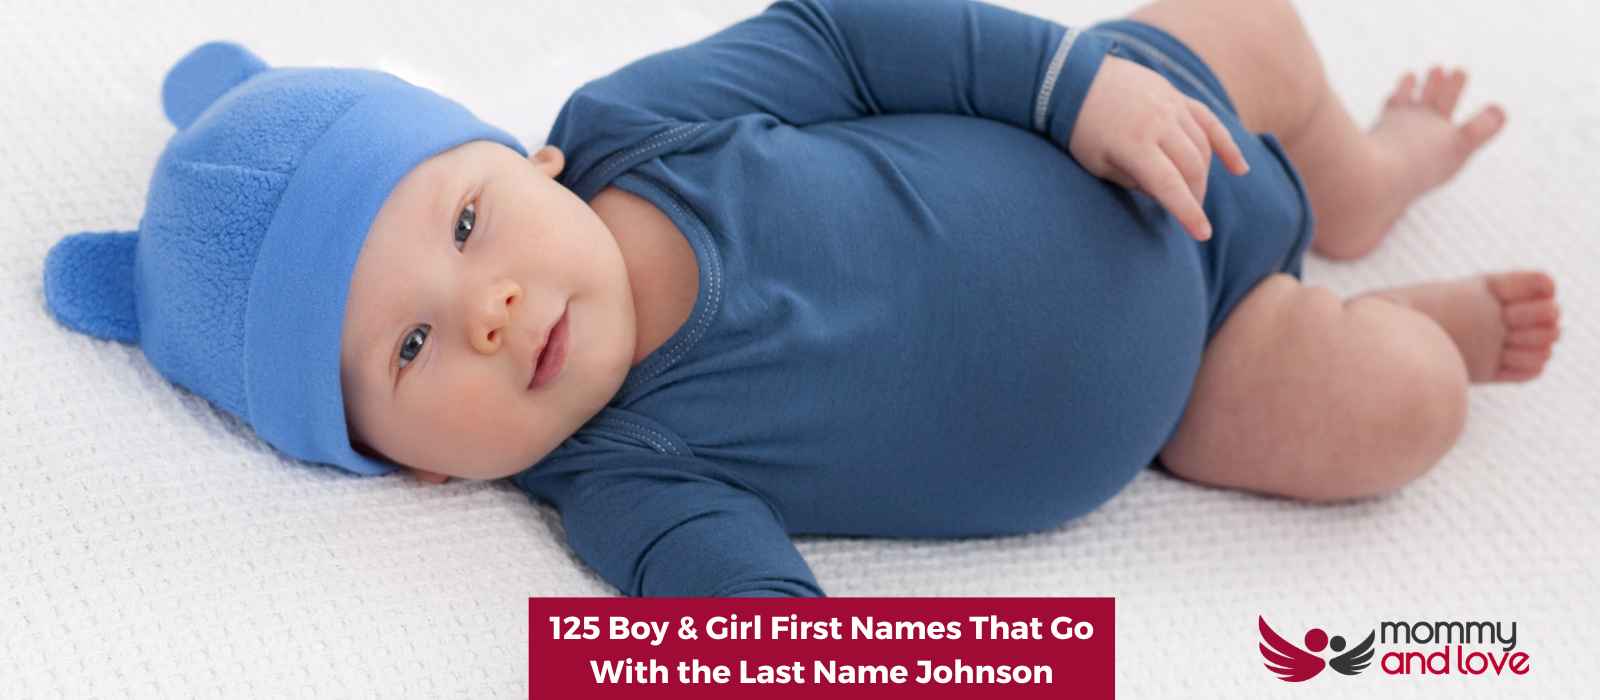 125 Boy & Girl First Names That Go With the Last Name Johnson